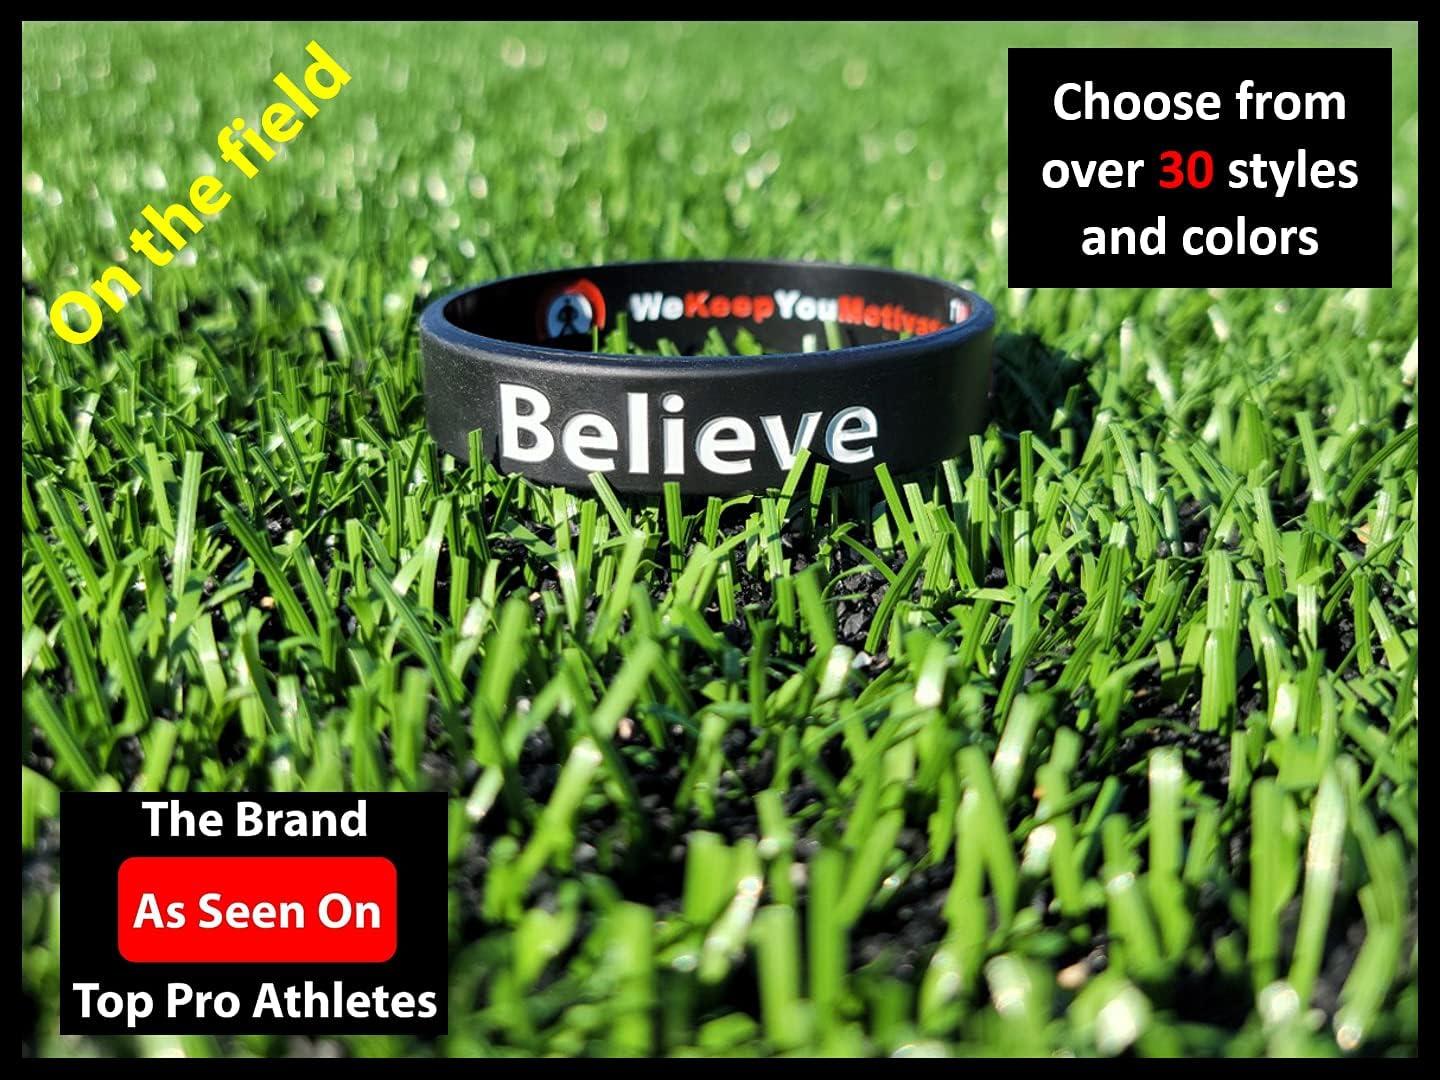 Motivational Wristbands - Worn by Pro Athletes - Silicone Rubber